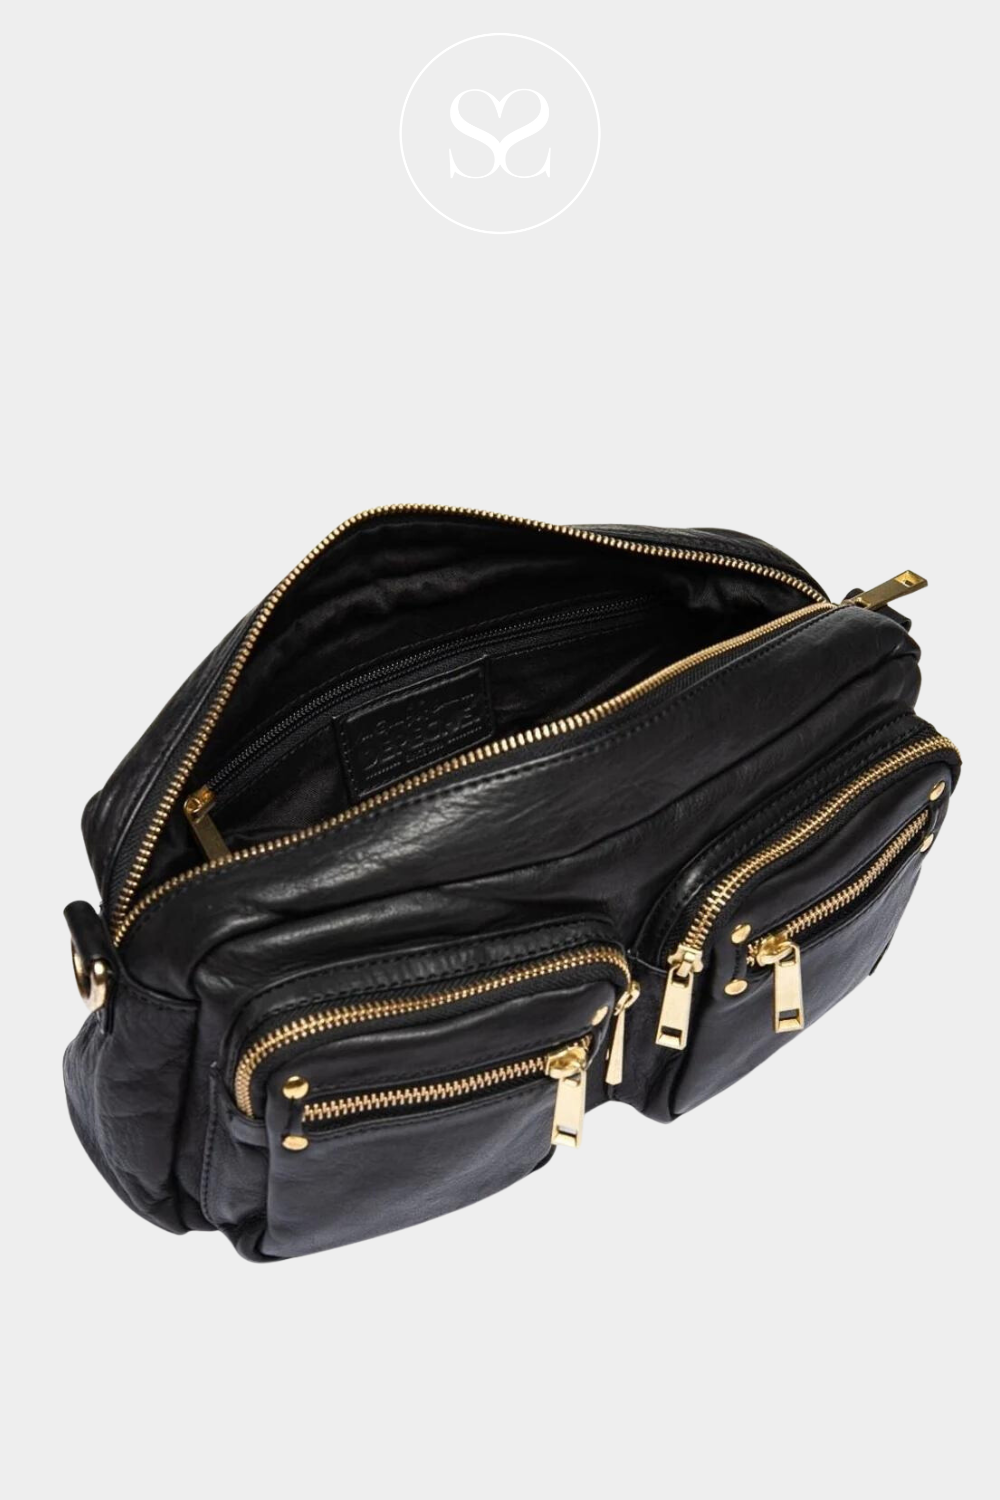 DEPECHE 12670 BLACK LEATHER CROSSBODY BAG WITH FRONT POCKETS AND GOLD HARDWARE